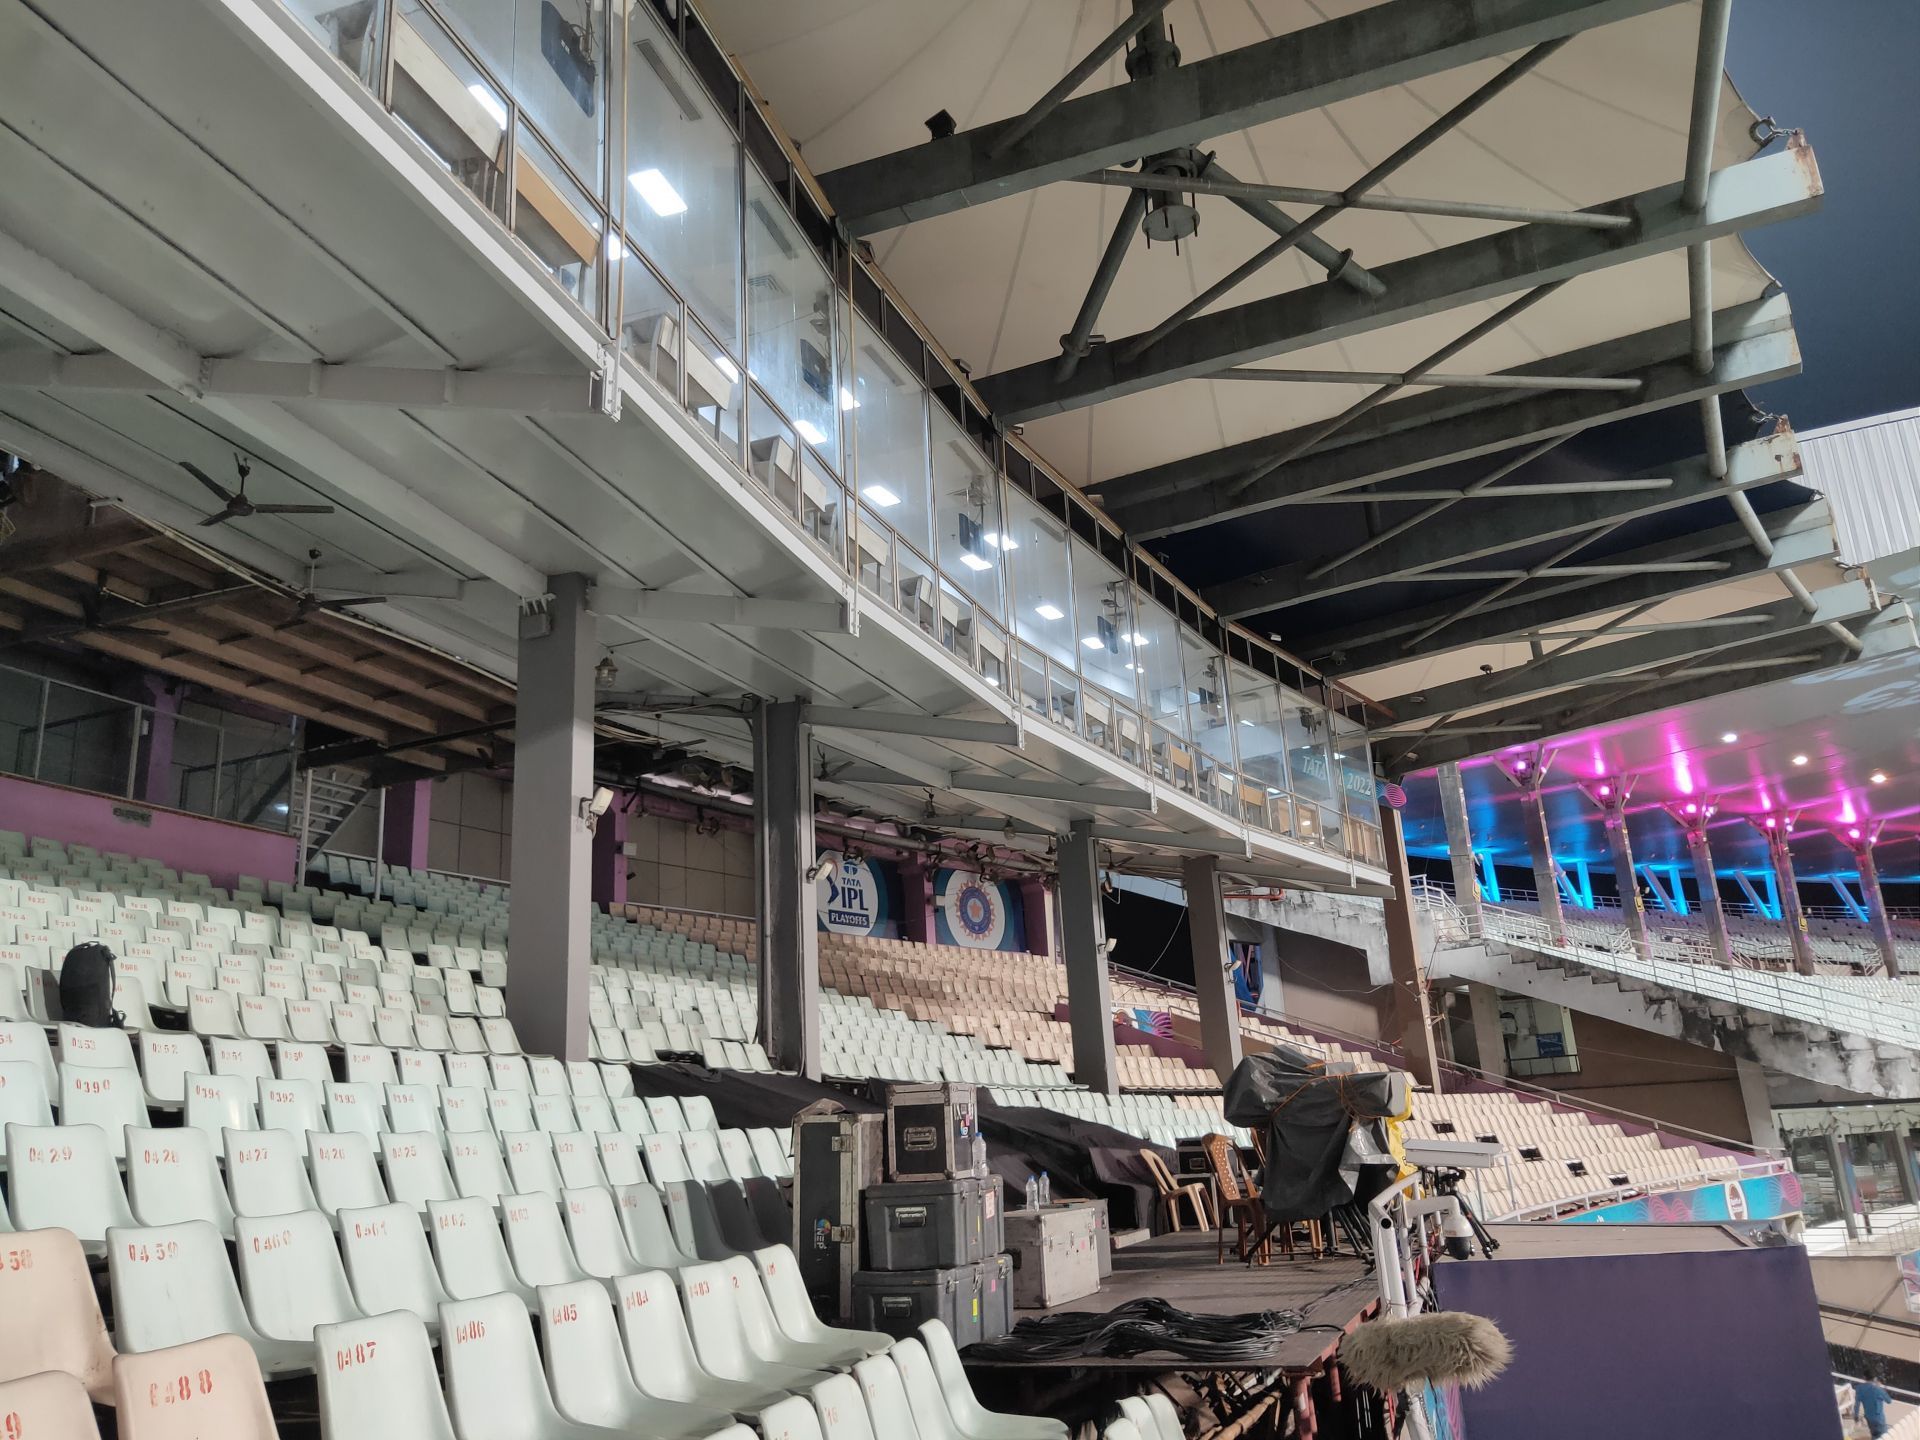 The press box glass which was completely shattered on Saturday has been replaced [Credits: Srinjoy Sanyal]